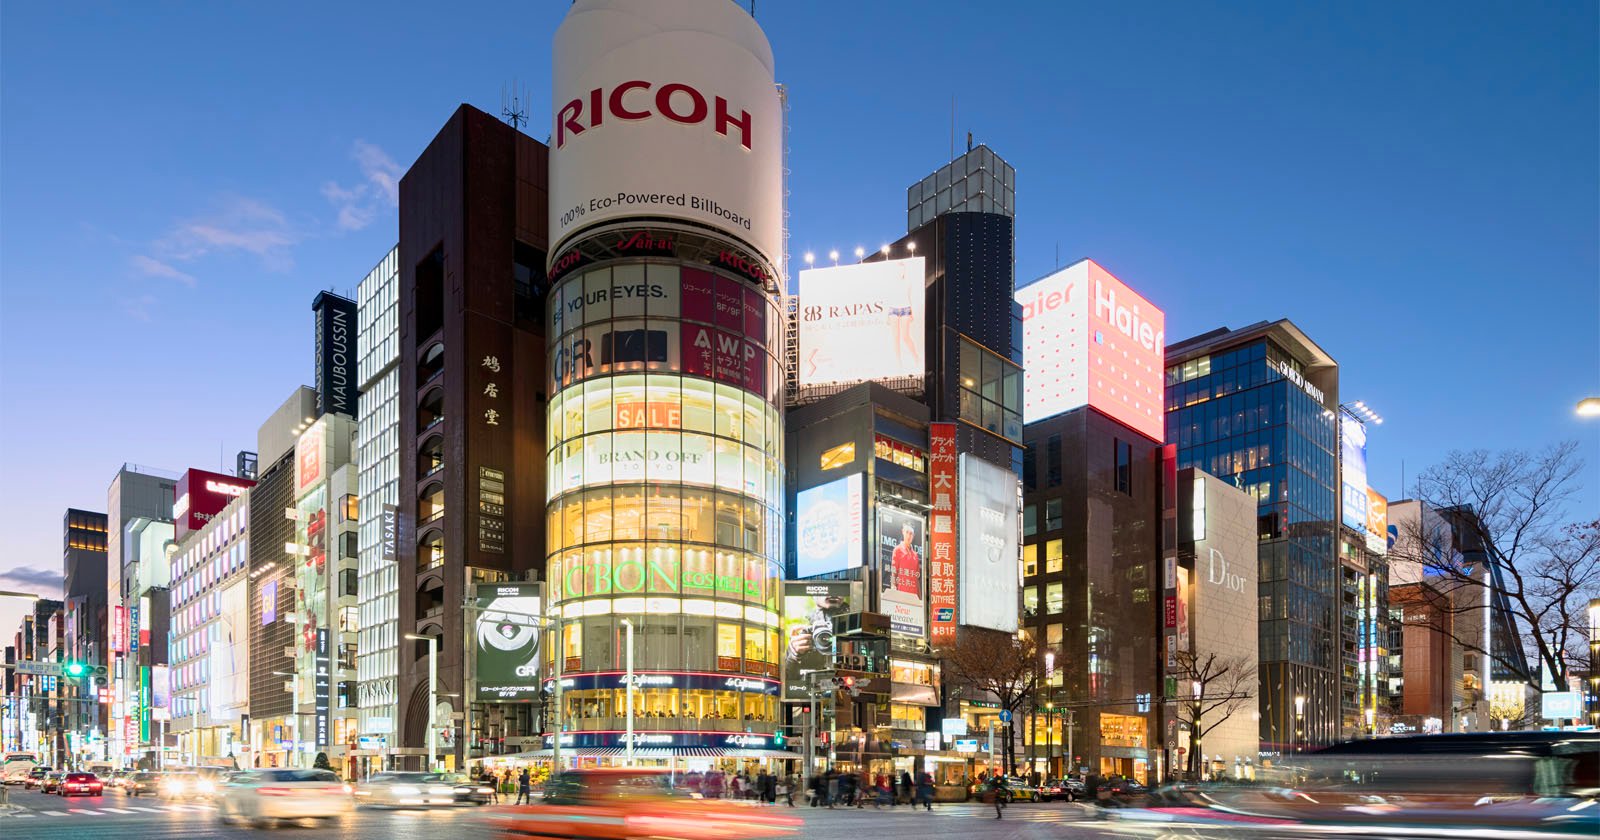 President of Ricoh Japan Resigns for Pressuring Woman to Have Abortion